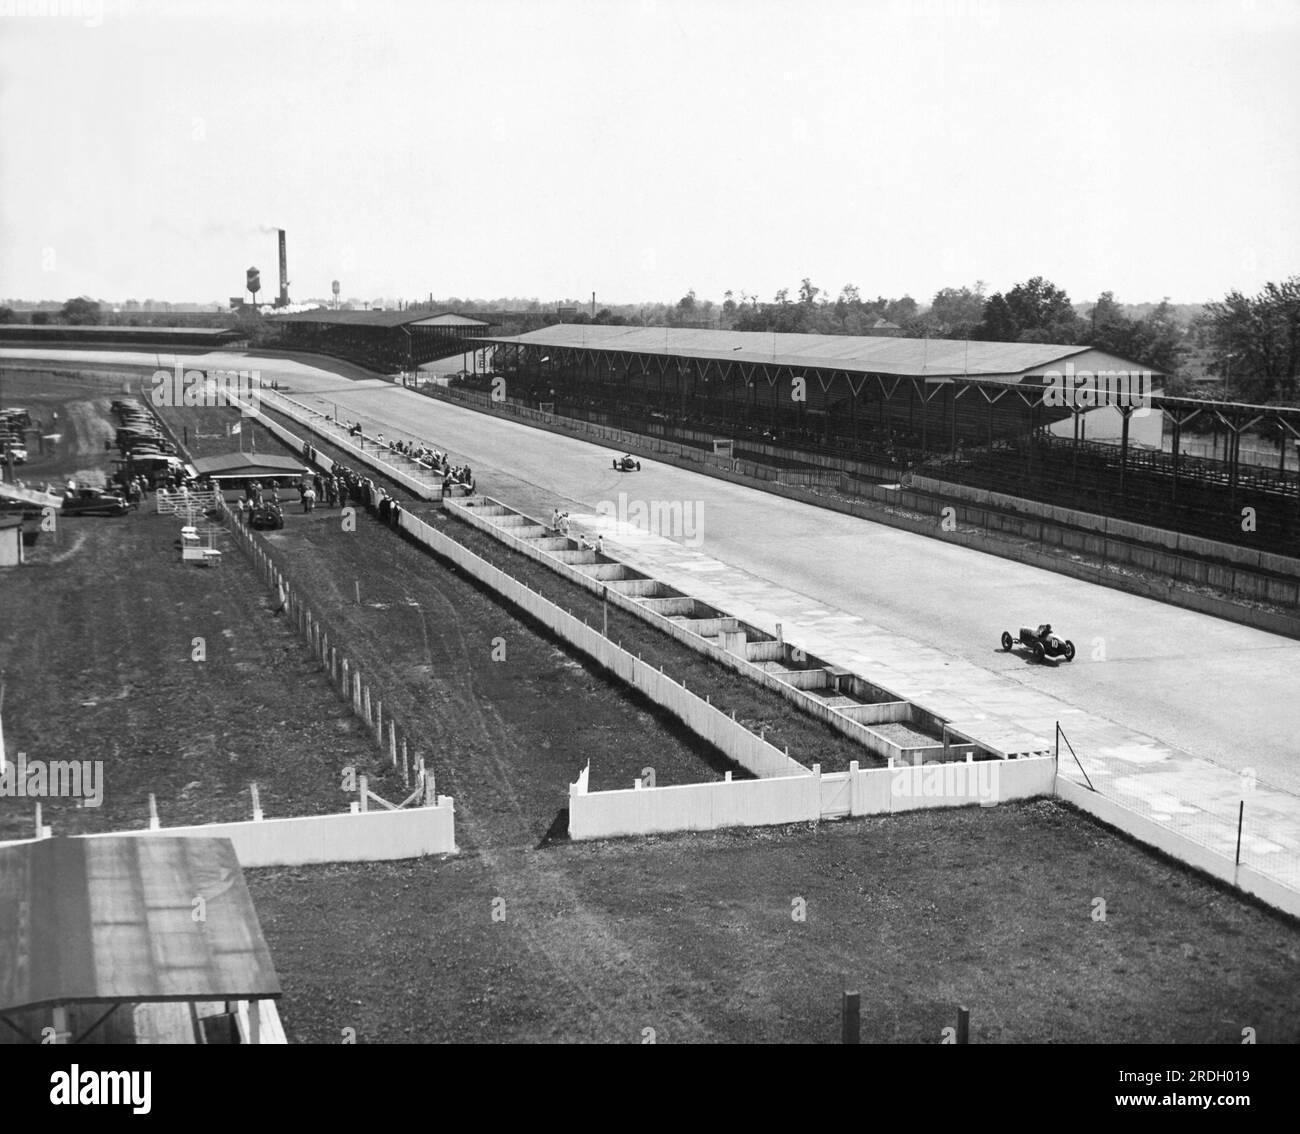 Indianapolis, Indiana:  May 26, 1927 A view of the Indianapolis Speedway where elimination trials are taking place for the fifteenth International 500 mile race.. The minimum qualifying speed is 90 mph and some of the cars working out have been hitting as high as 118 mph. Stock Photo